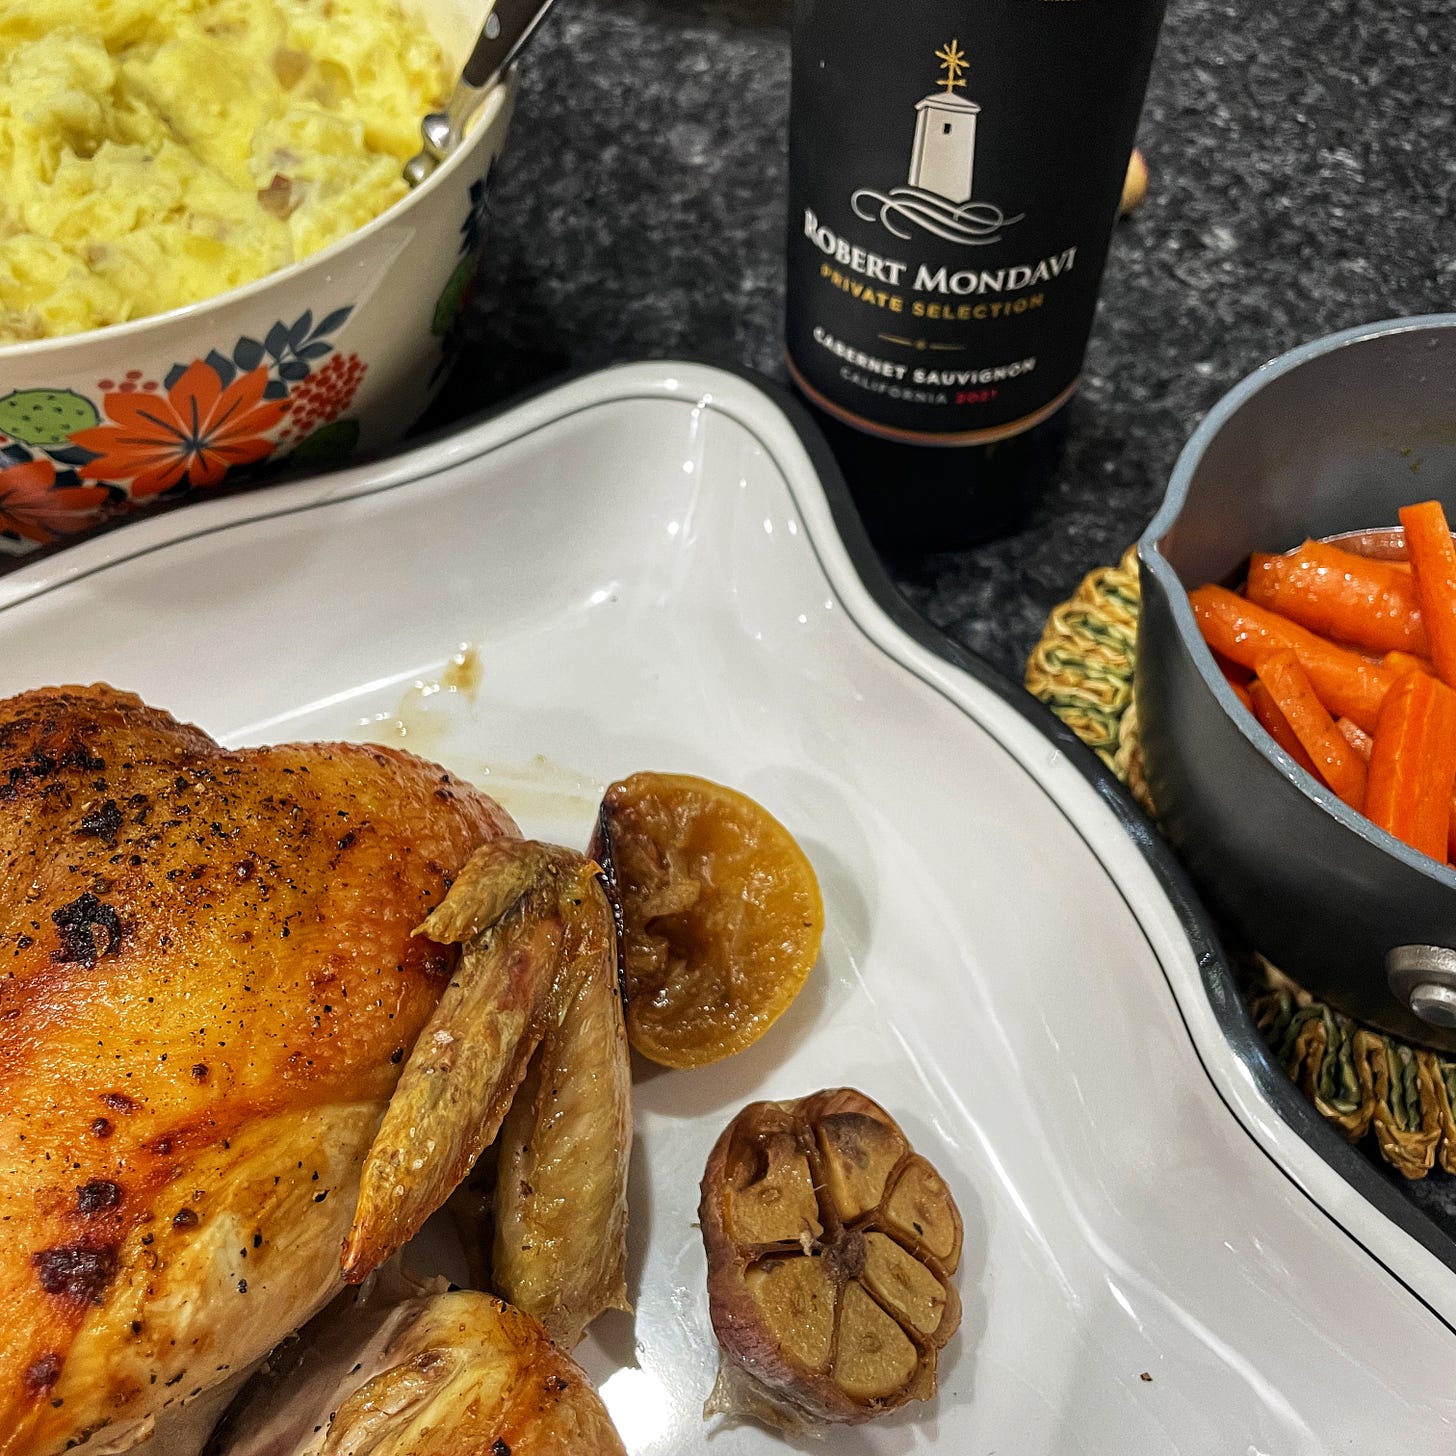 Roast chicken dinner complete with mashed potatoes, boiled carrots, and a bottle of cabernet sauvignon wine.